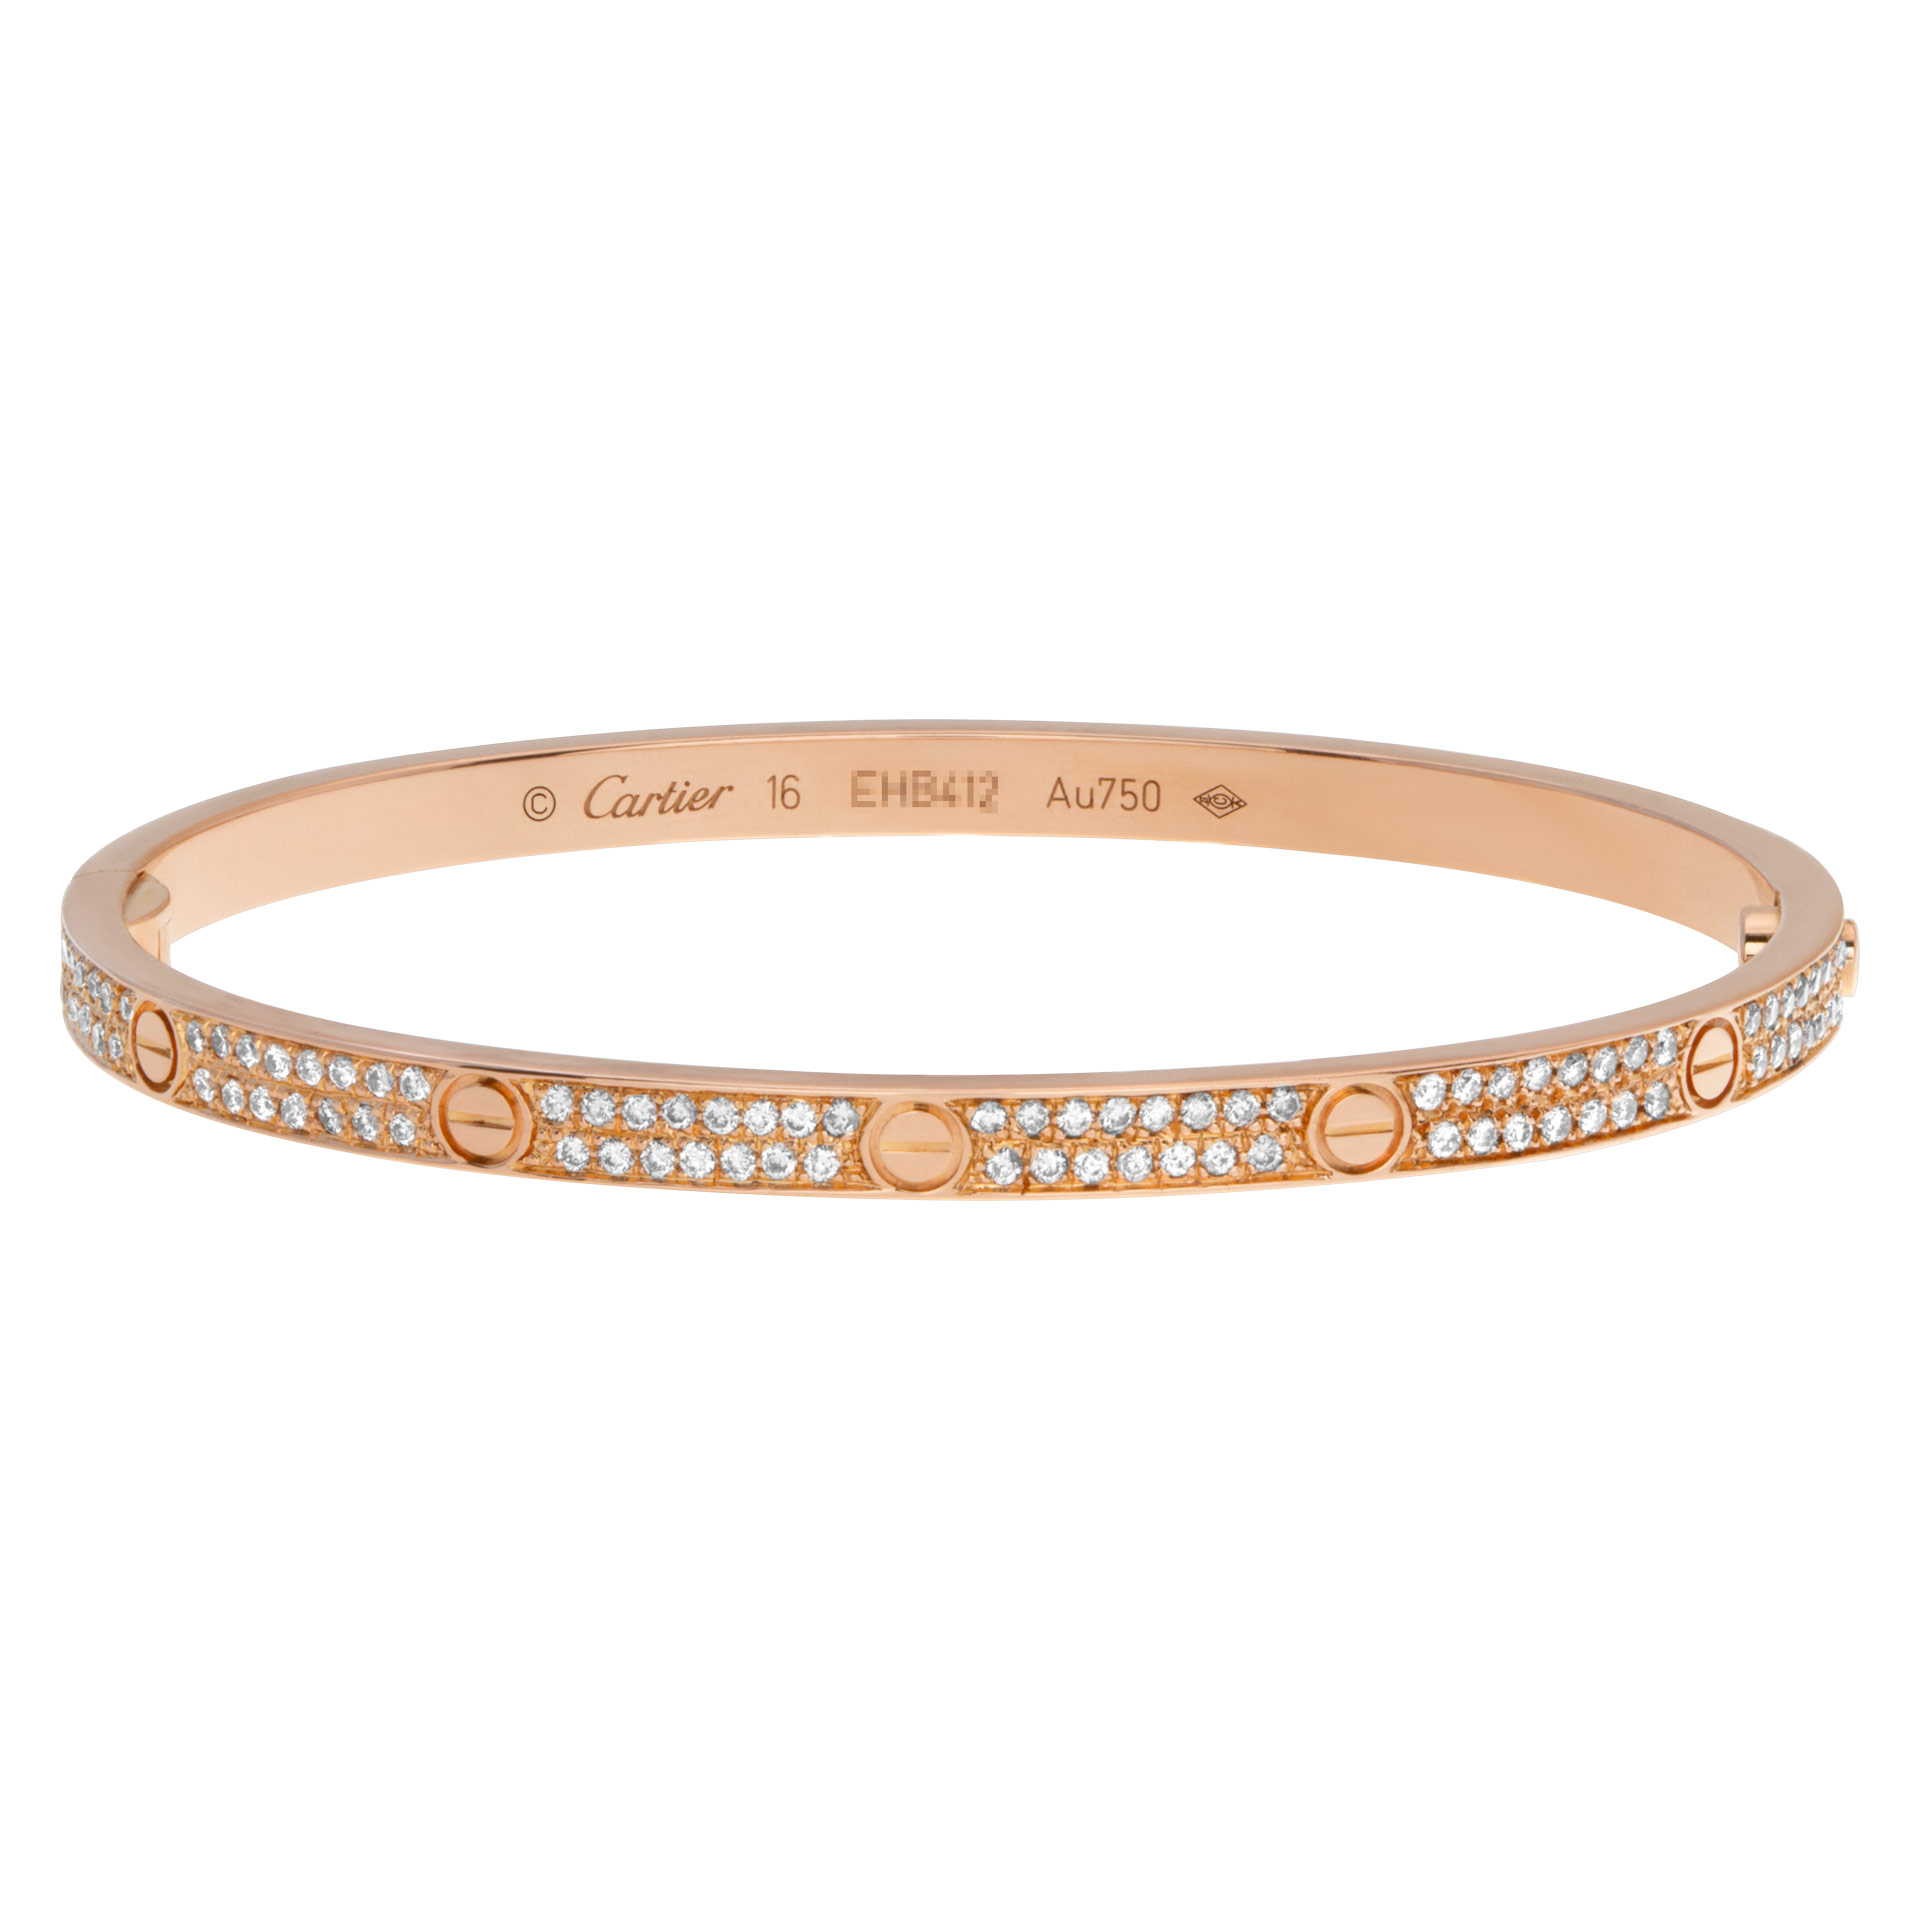 Cartier Love Bracelet With Pave Diamonds Small Model In 18k Rose Gold,Picture Of A Rational Number